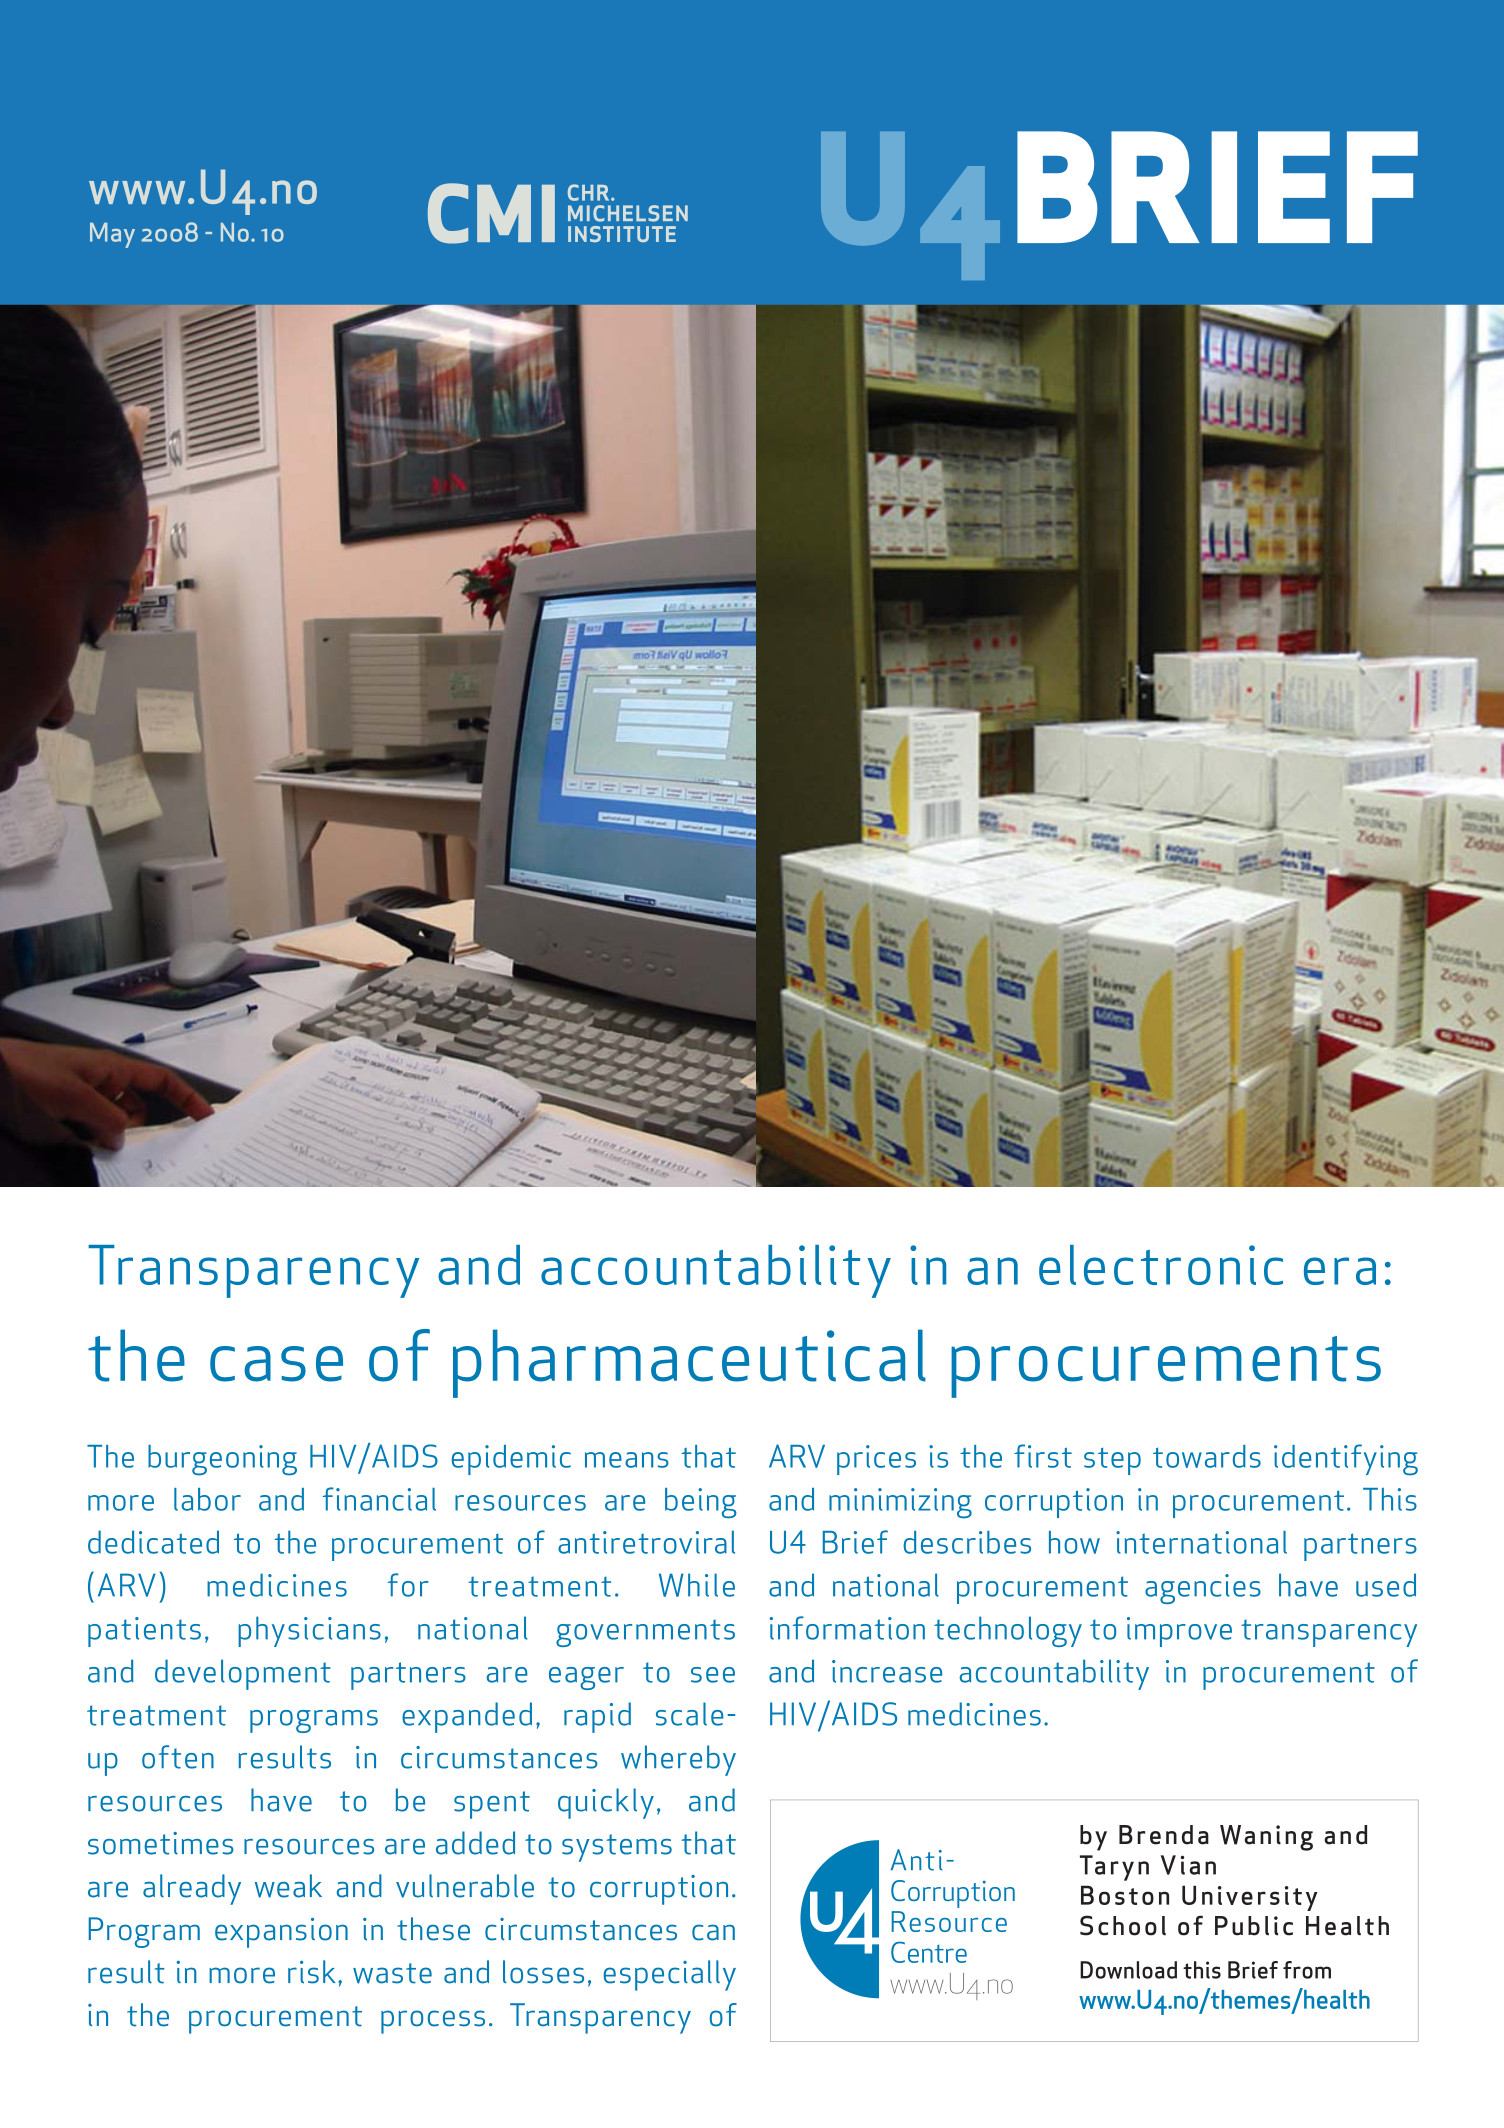 Transparency and accountability in an electronic era: The case of pharmaceutical procurements